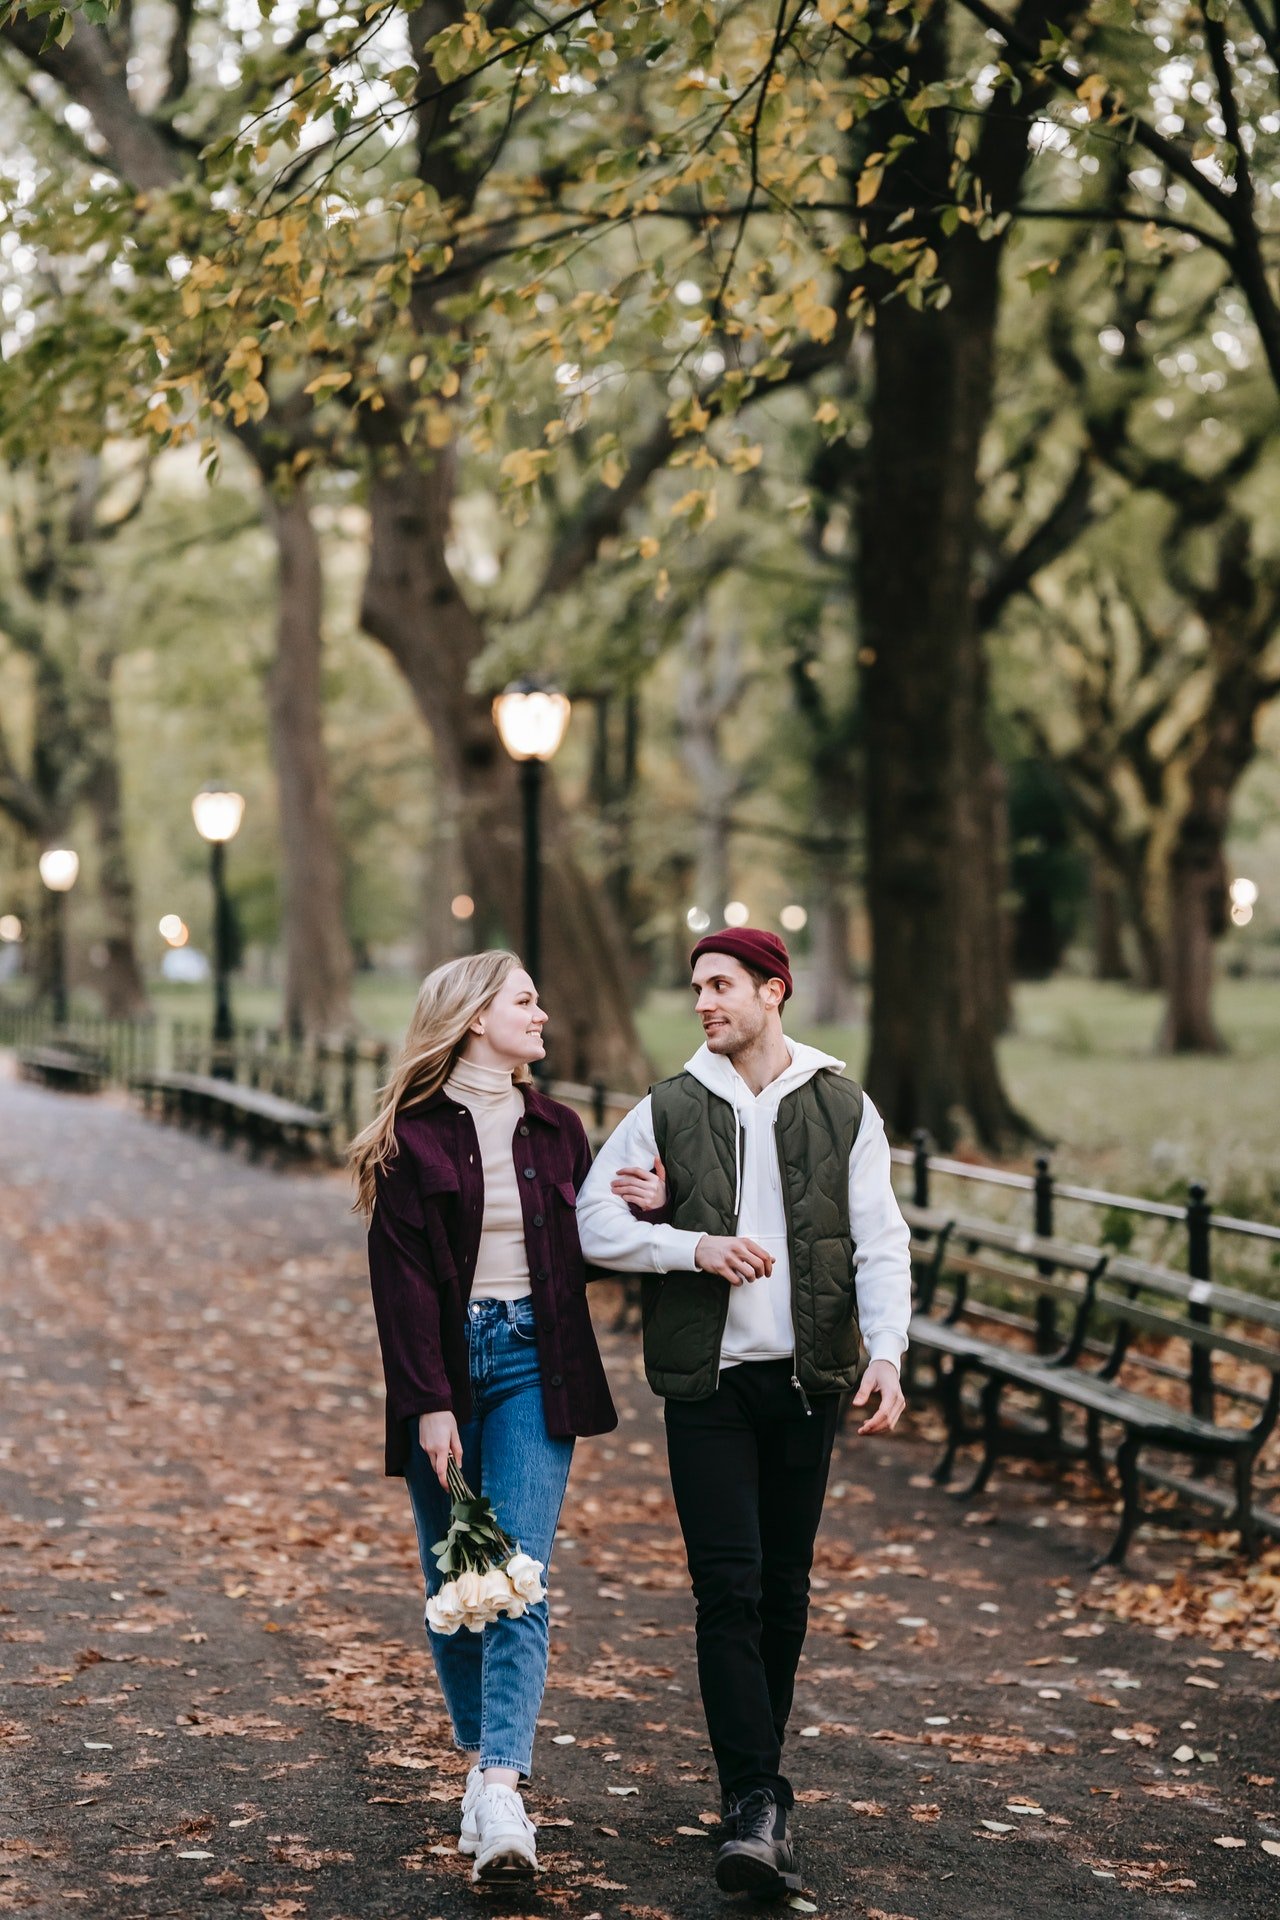 Mark and I walked hand-in-hand in the park. | Source: Pexels